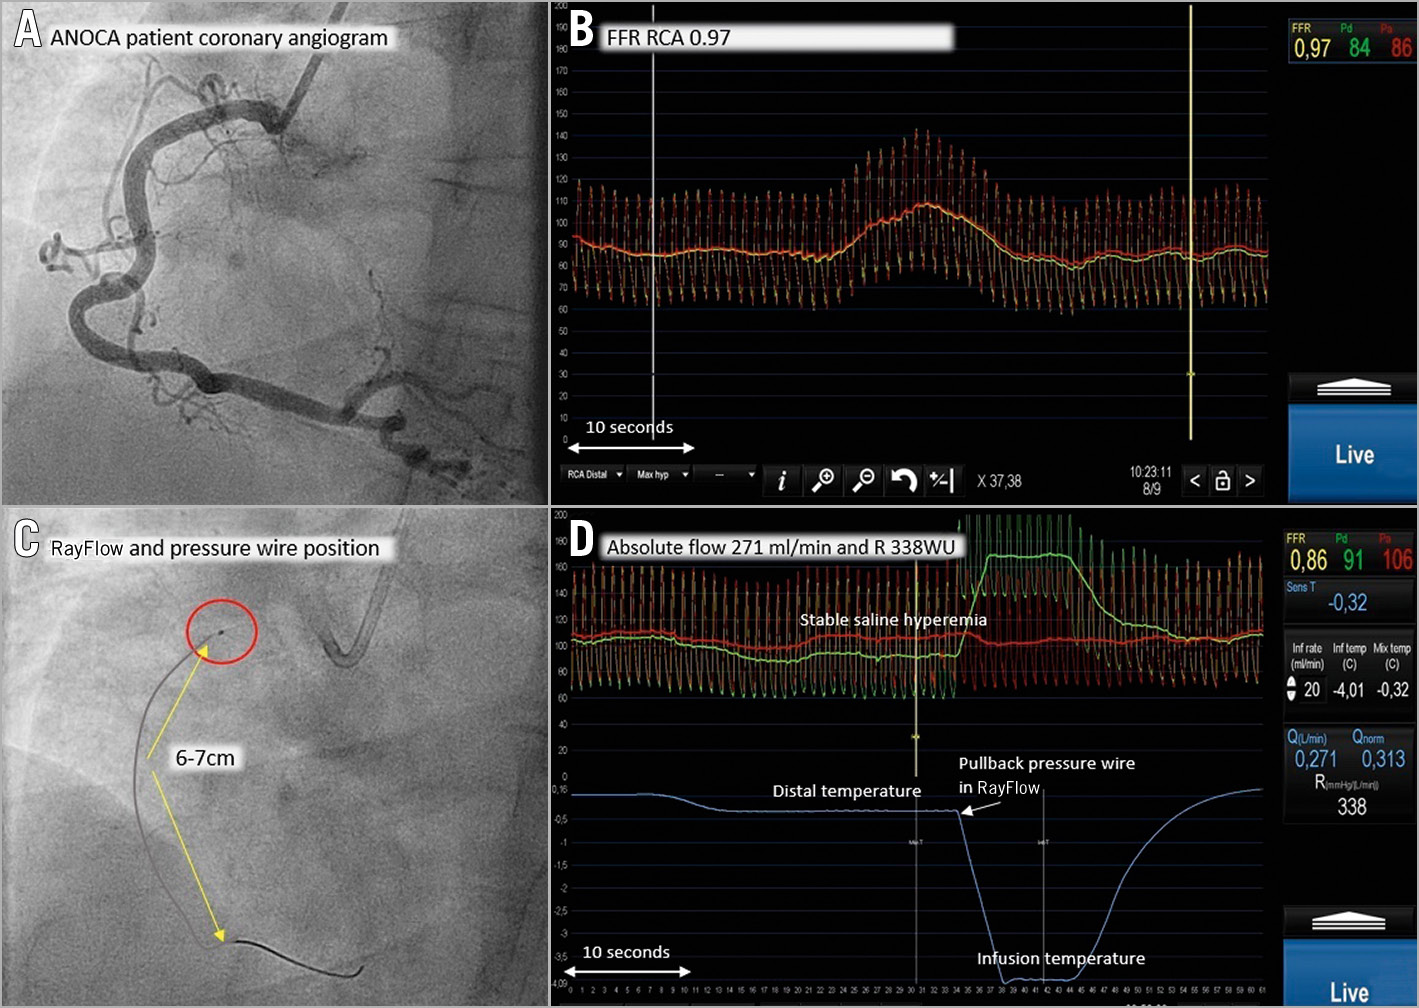 Figure 1. Procedural example. Normal RCA with FFR and absolute flow/resistance measurements. Extensive legend in Supplementary Appendix 1.